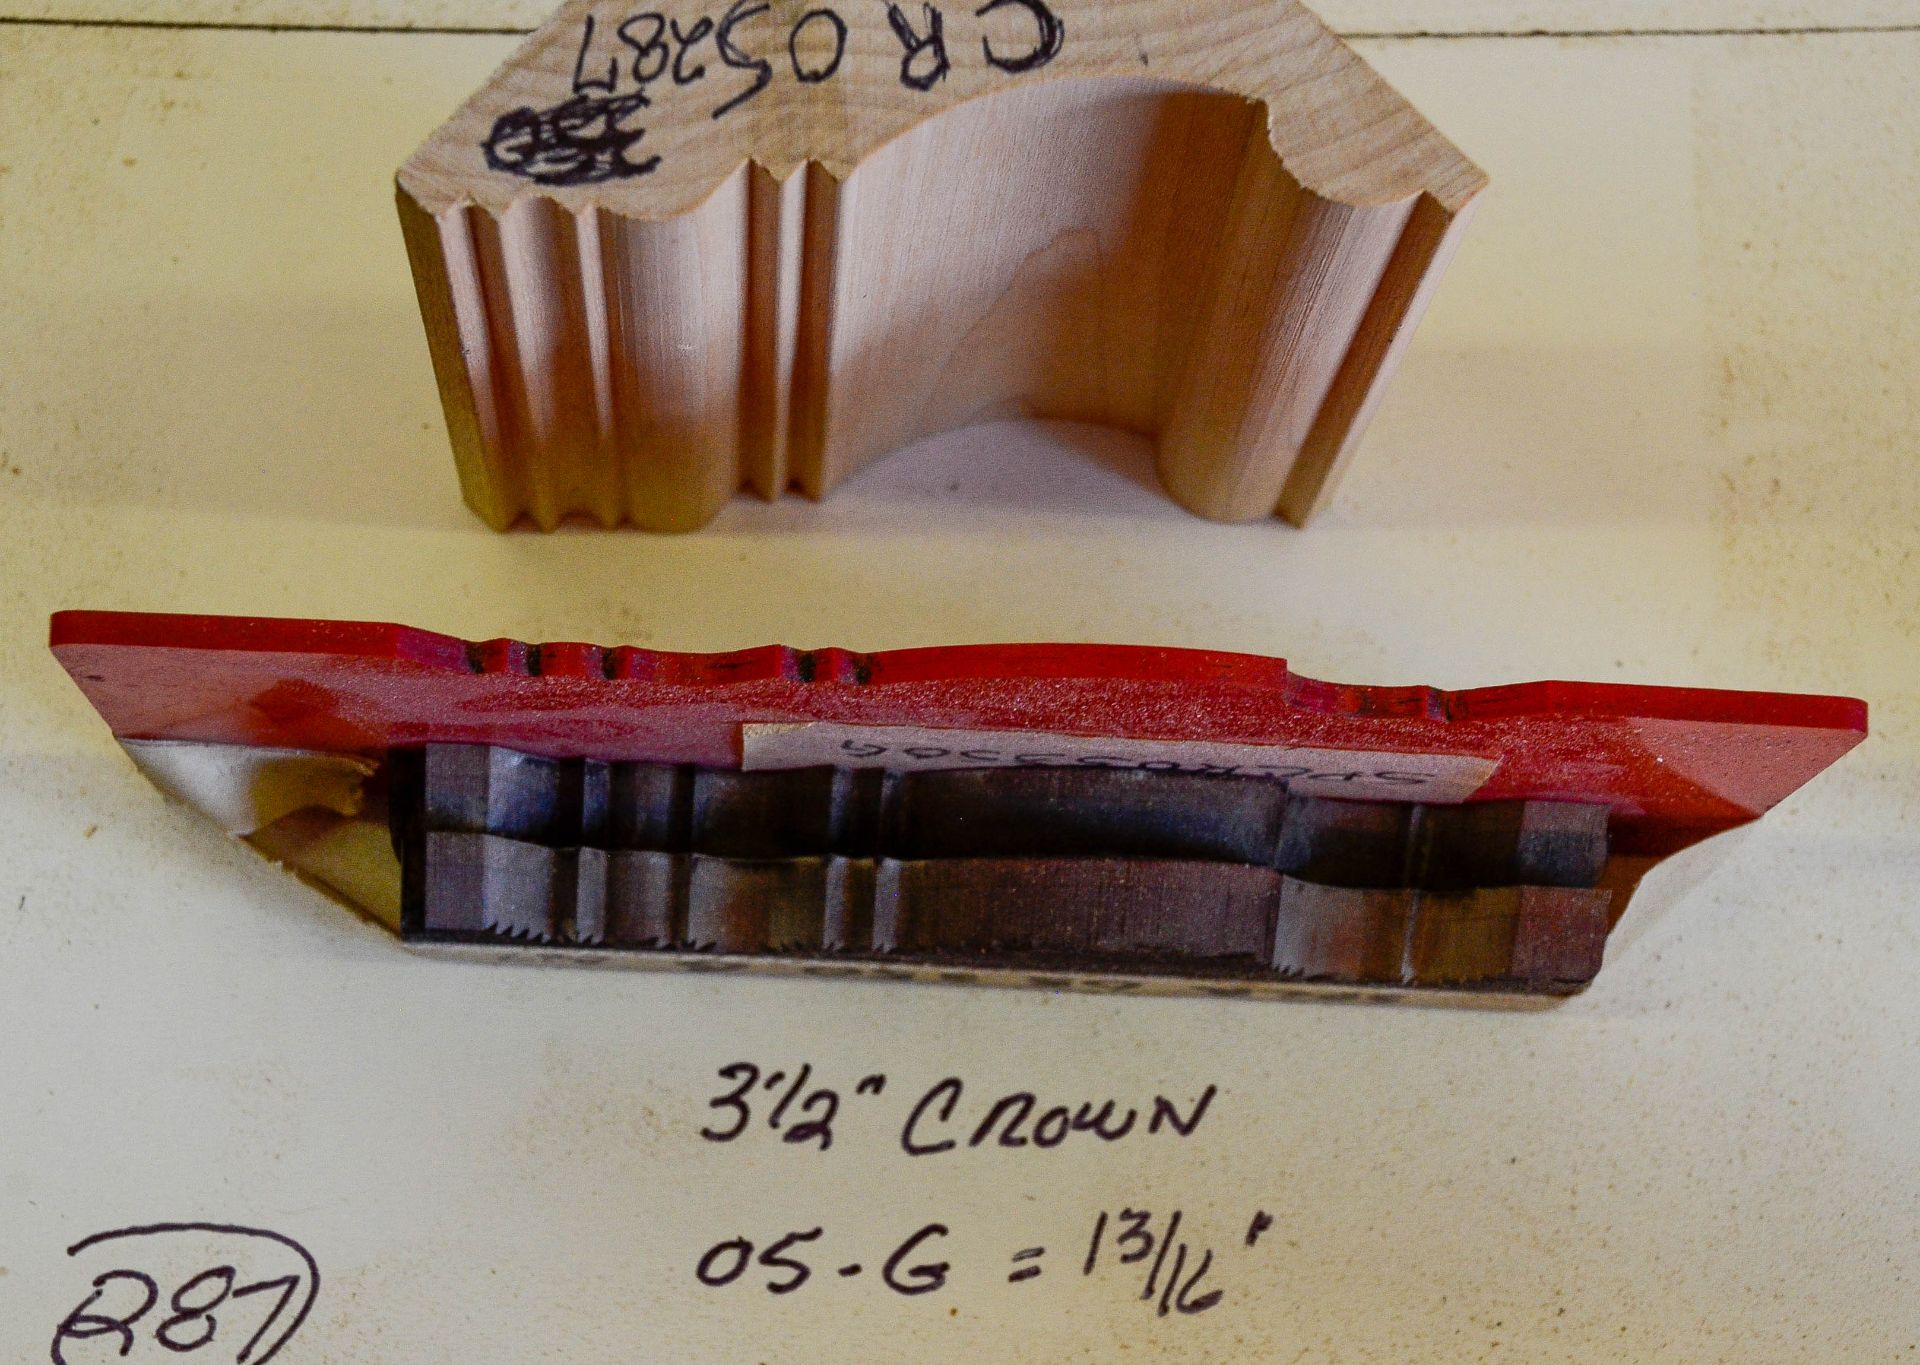 Moulding Knives, 3-1/2" Crown, 05 - G = 13/16" Knives are in Good Condition and Ready to Use (U.N - Image 2 of 2